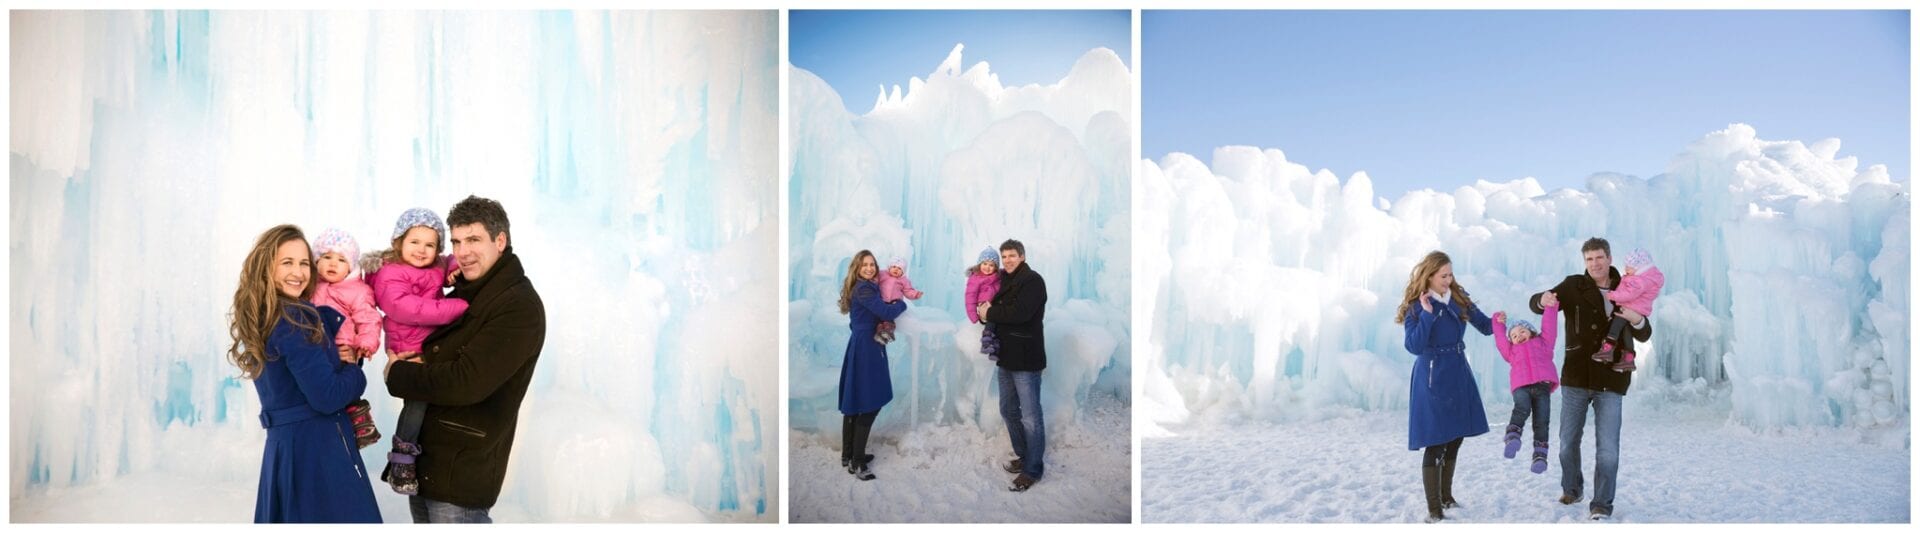 Edmonton Winter Family Outdoor Portrait Photography at the Ice Castles